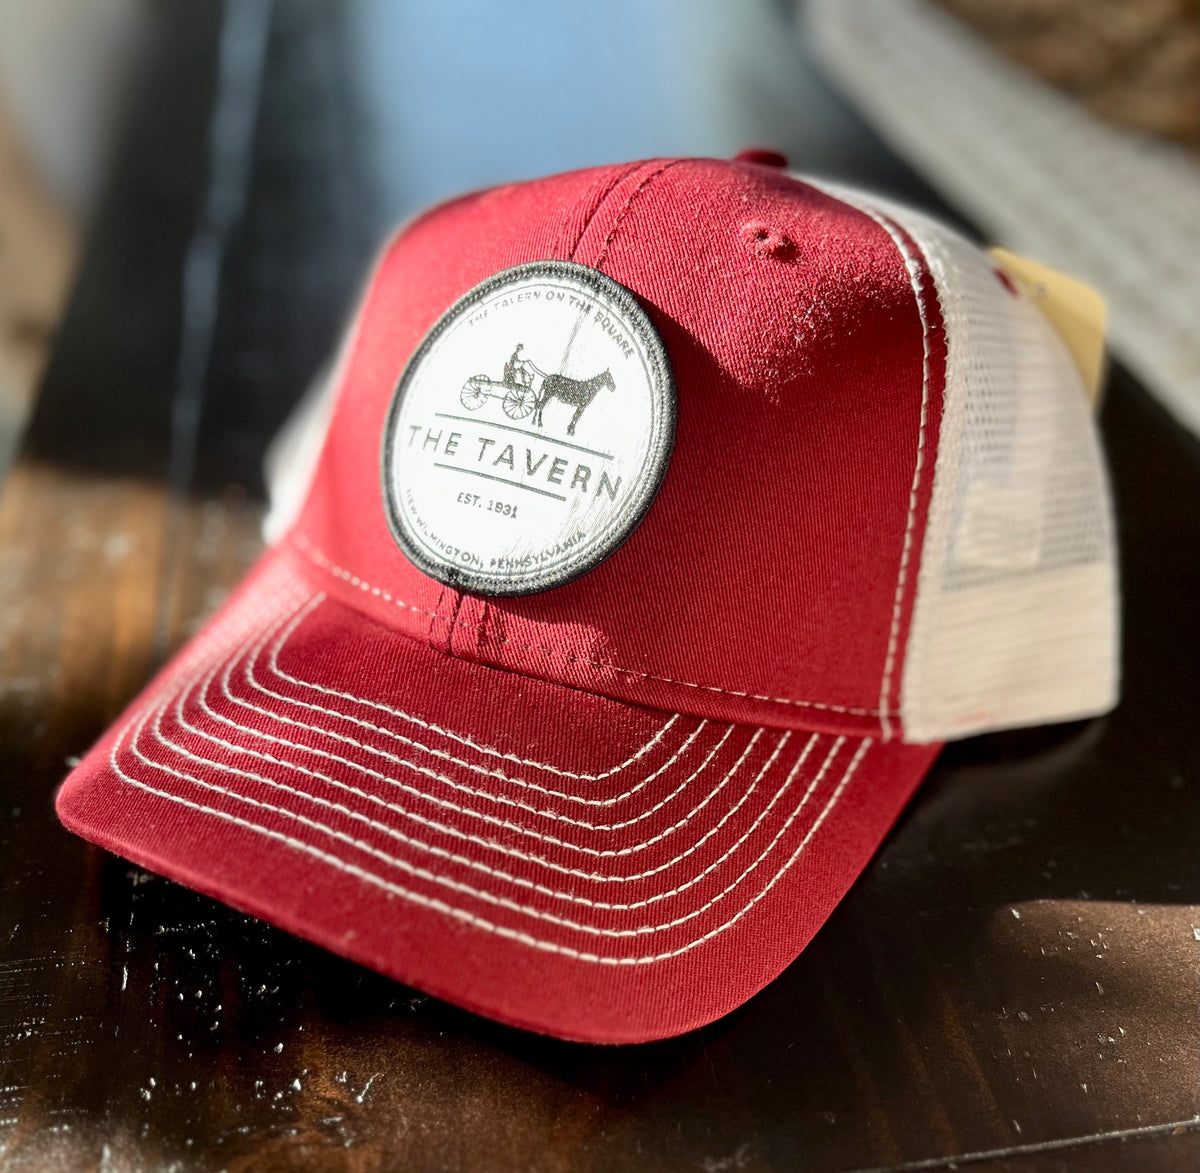 Sport your love of The Tavern On The Square with our comfortable, durable trucker hat! This hat features an iconic style crafted of soft, breathable fabric, a net back, snap closure, and a logo patch on the front featuring our historic logo.  o   Structured medium profile  o   Polyester mesh back  o   100% cotton twill front panels and brim  o   Slightly curved visor  o   Plastic snap closure   o   One Size Fits Most